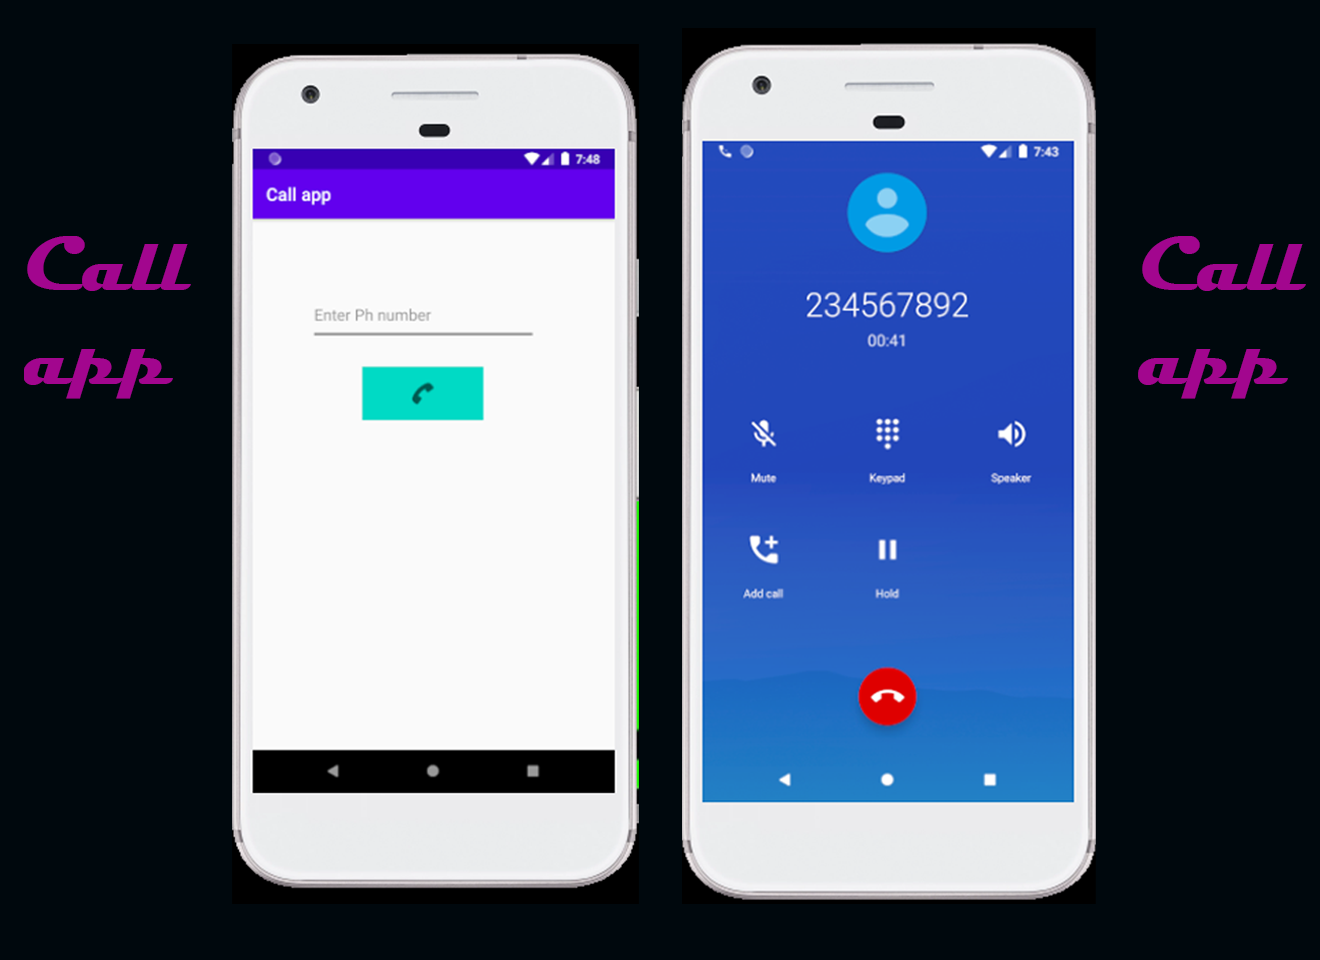 Call app-How to make a phone call in android